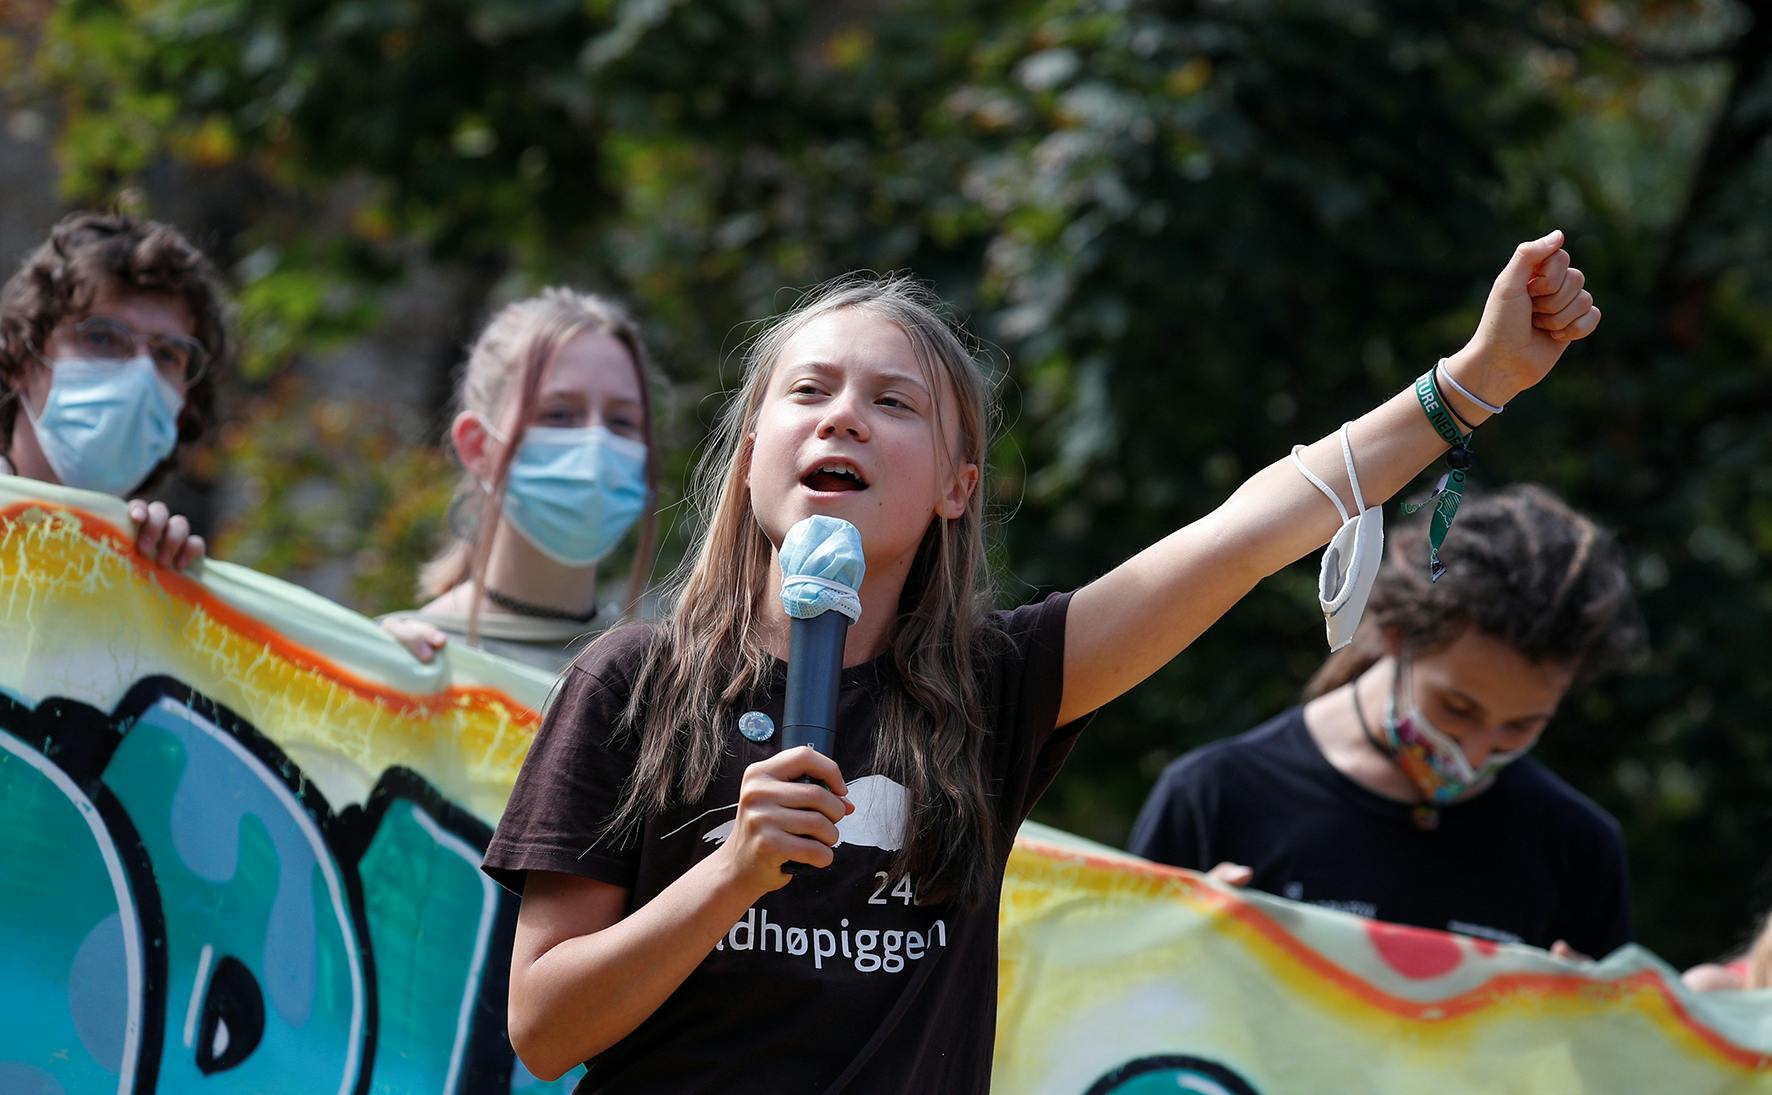 Why Greta Thunberg is cooler than you